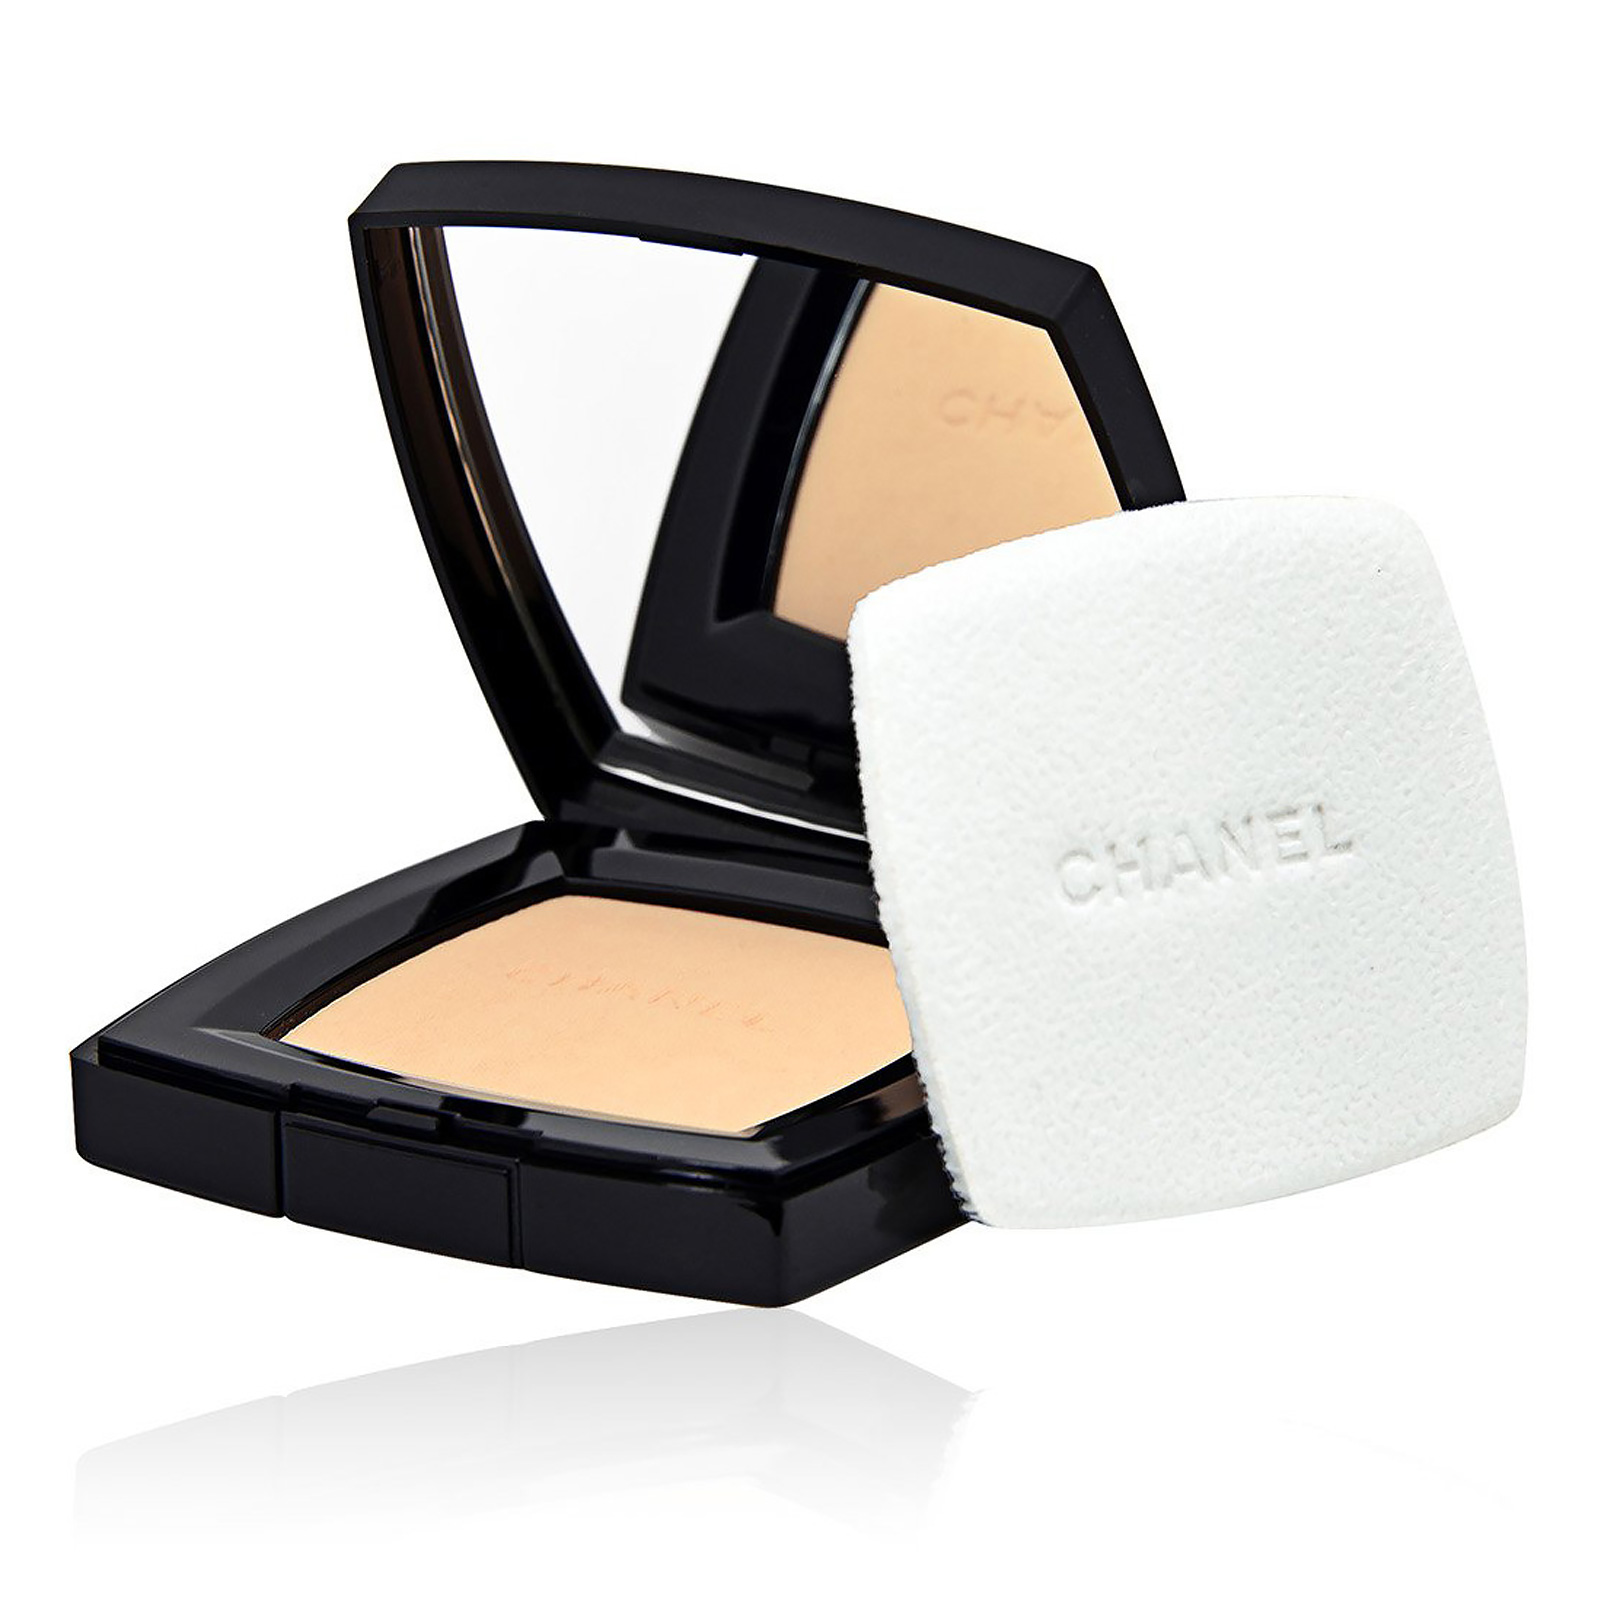 Phấn Phủ Chanel Poudre Universelle Compacte Natural Finish Pressed Powder  15g Dạng Nén